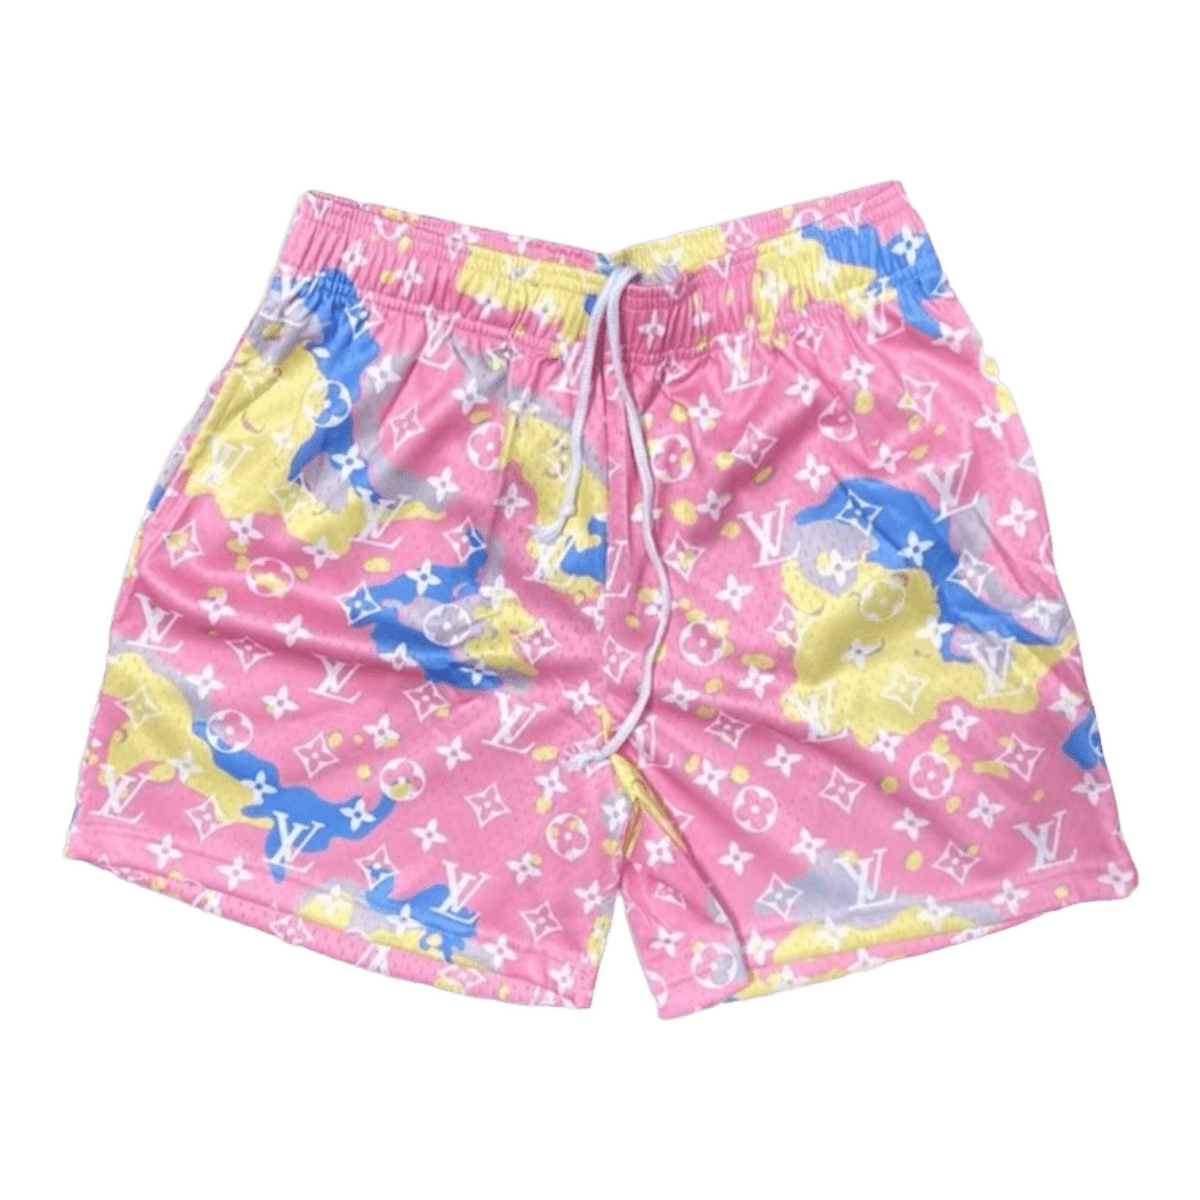 Bravest Studios LV Cotton Candy Camo Shorts - Shorts - Jawns on Fire Sneakers & Streetwear